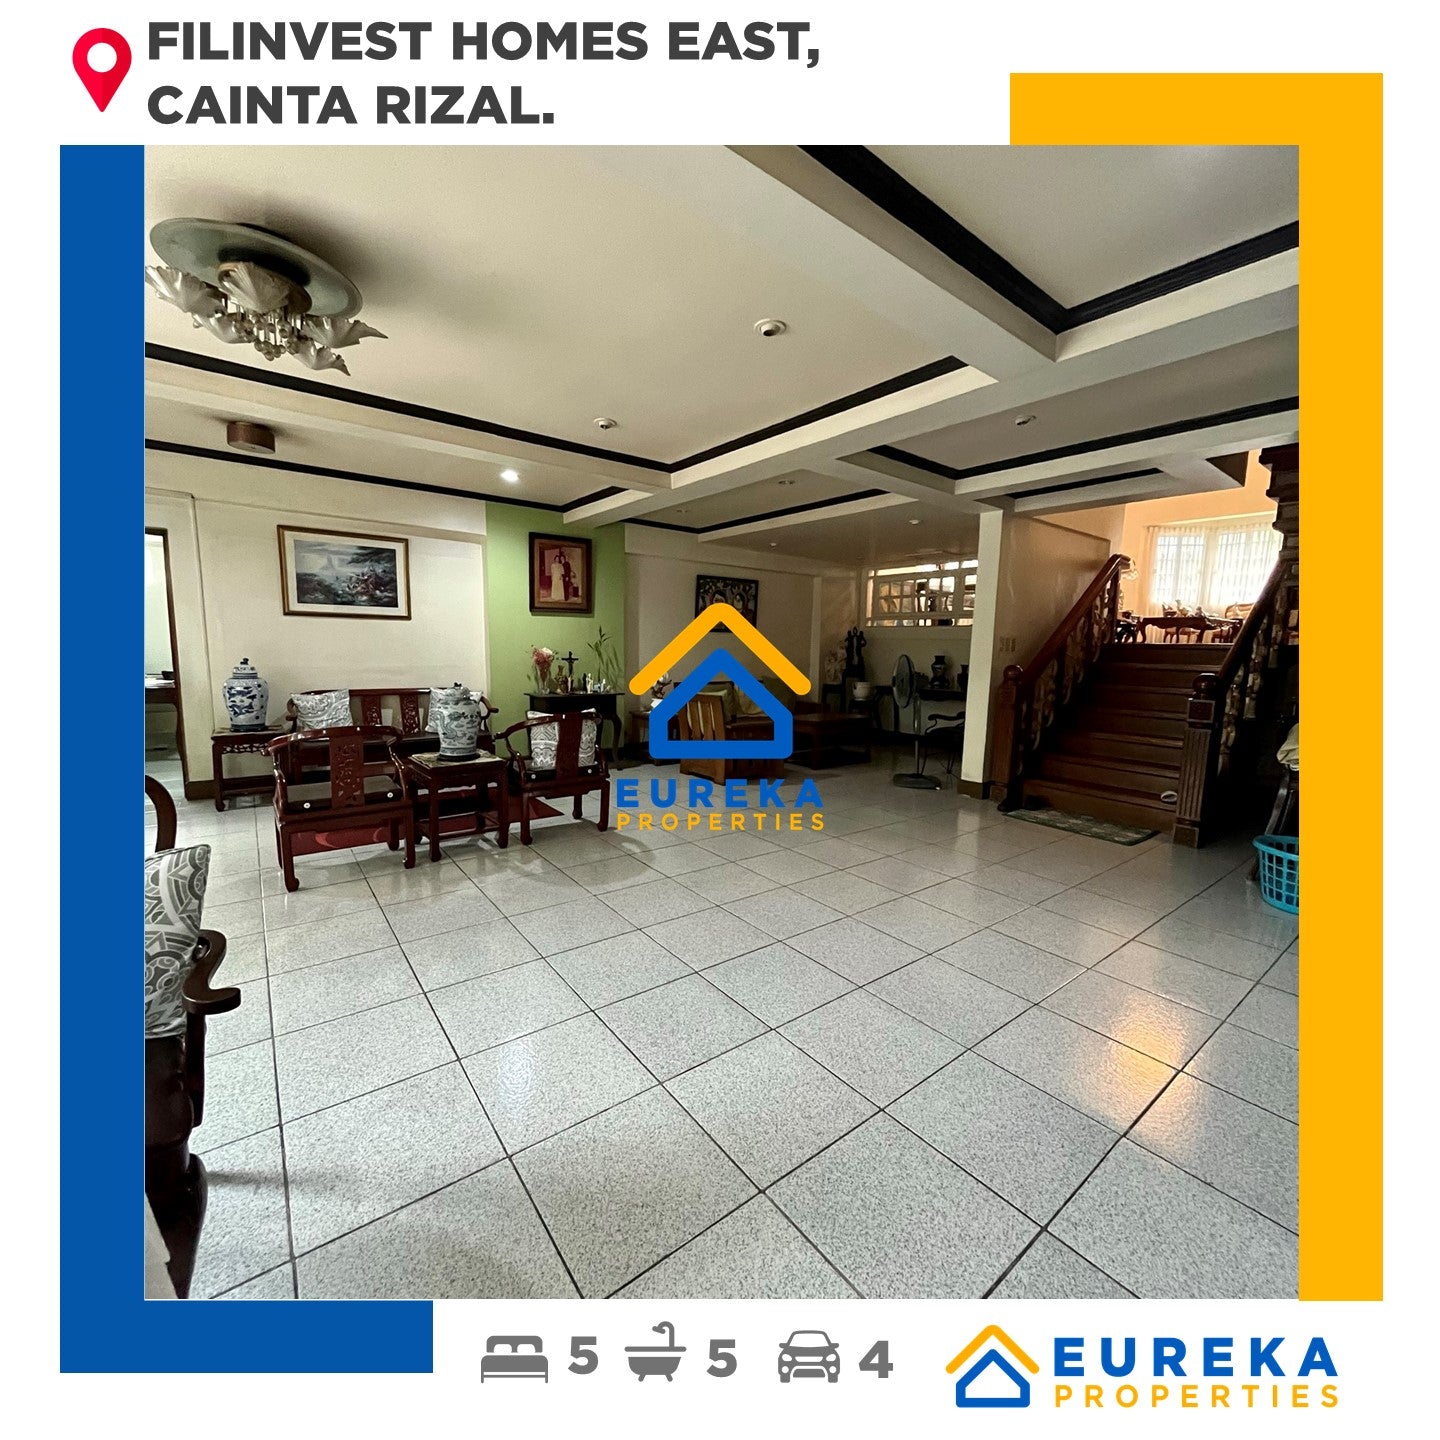 652 sqm House and lot in Filinvest Homes East, Cainta Rizal.